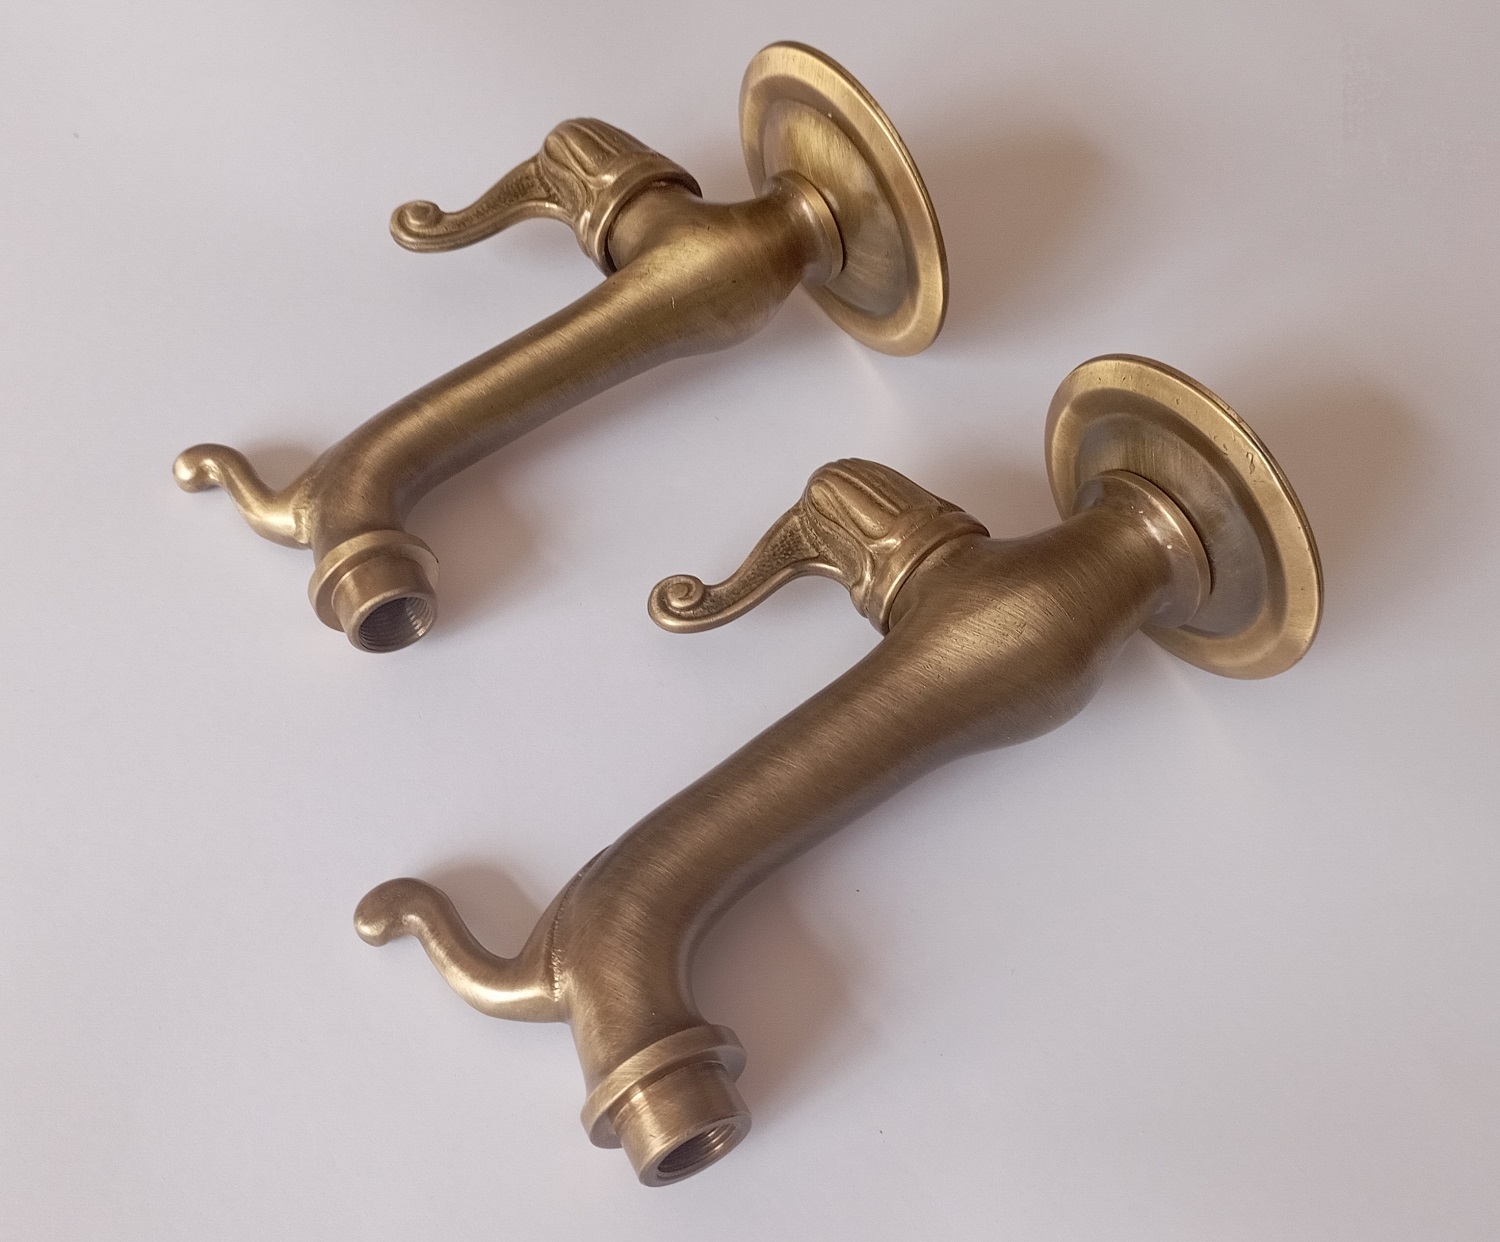 Decorative wall-mounted water spigots for exterior